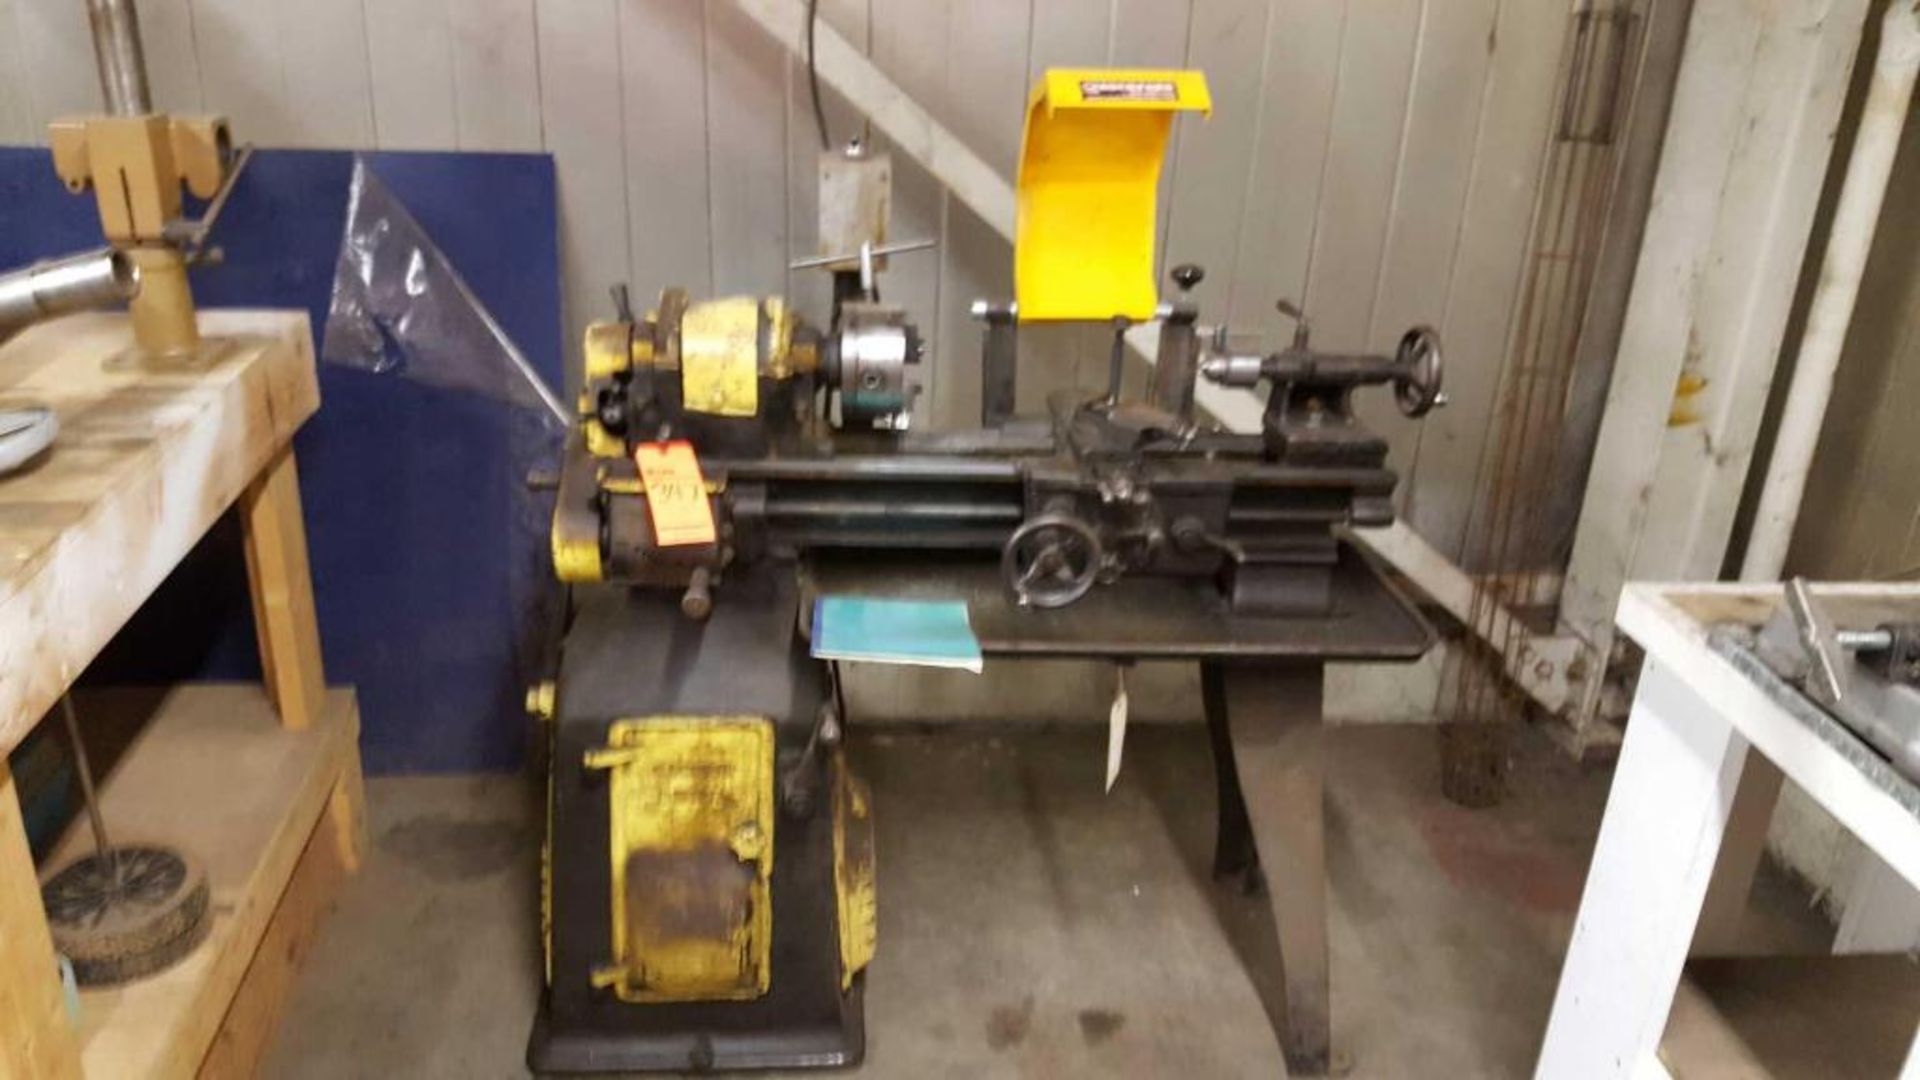 South Bend engine lathe with 9" swing x 16" BC, 3 jaw chuck, and Jacobs chuck